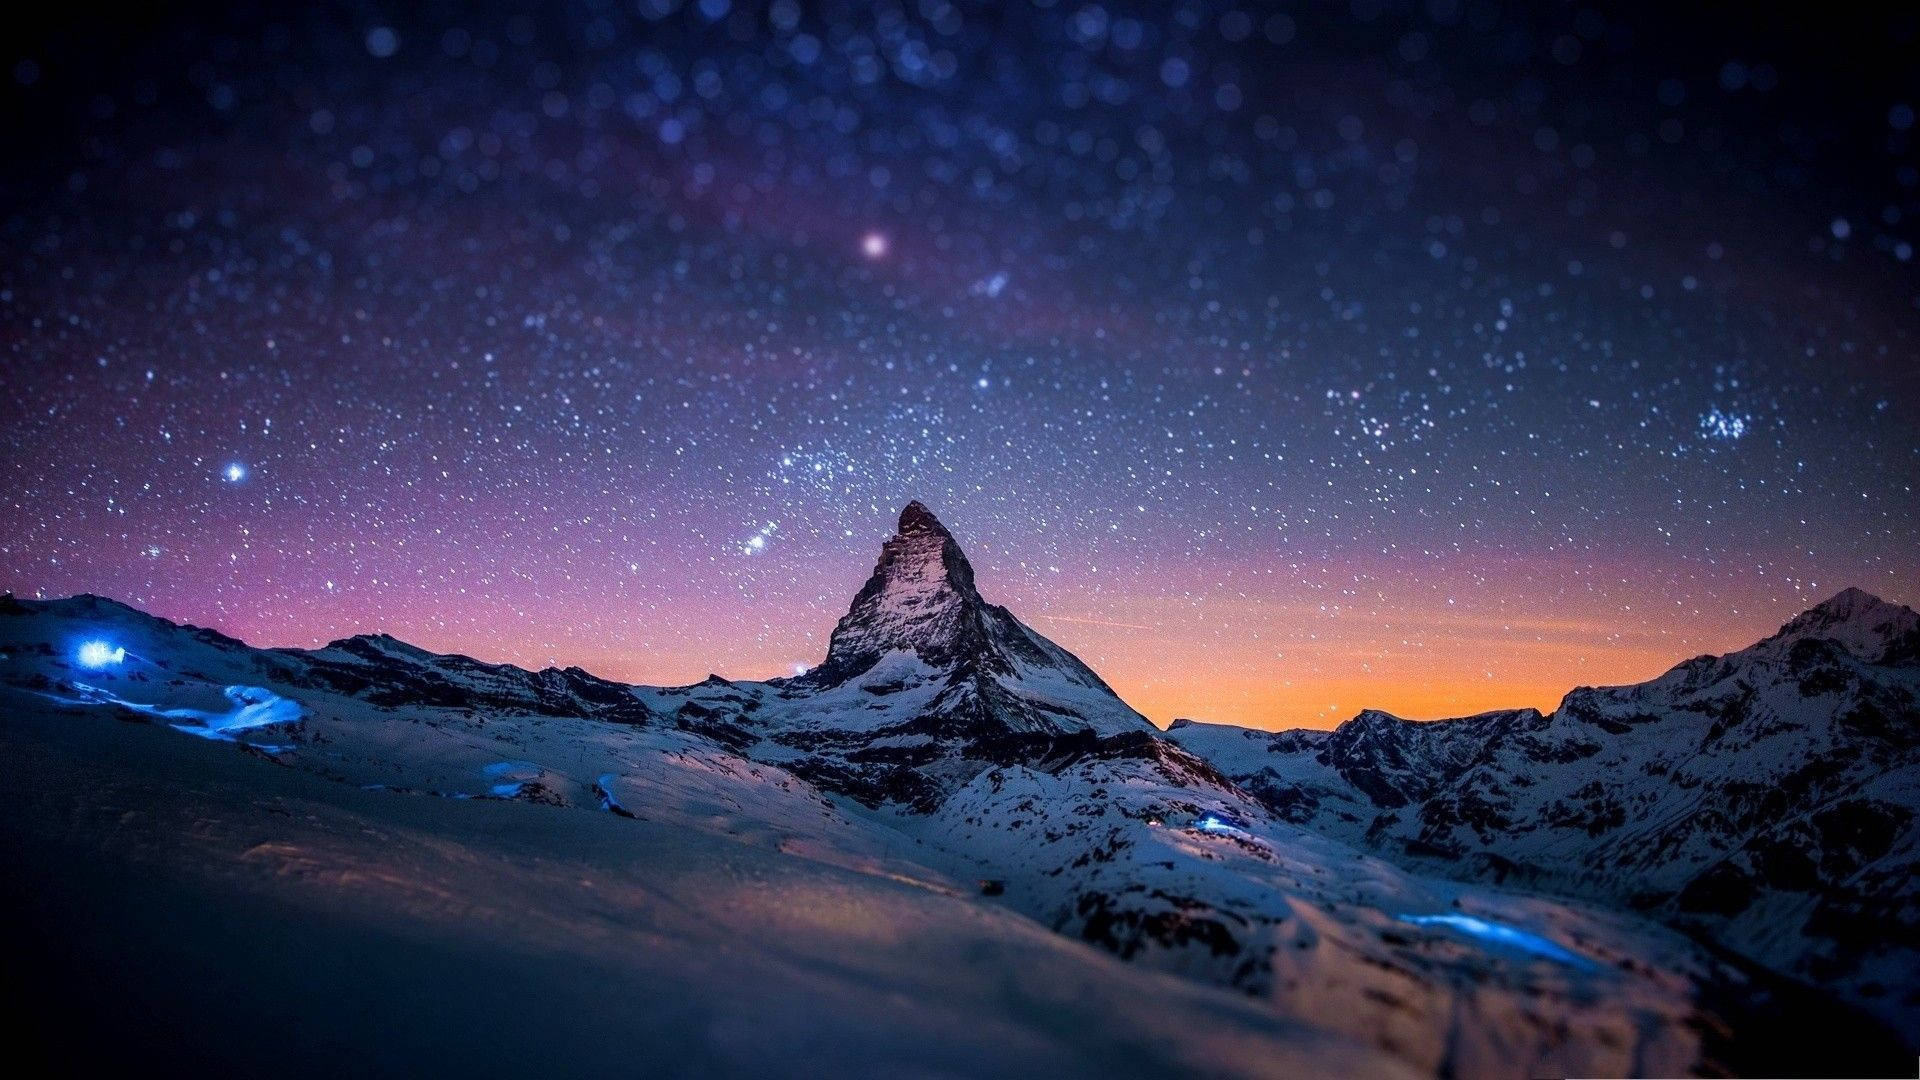 Windows Winter On Mountains And Starry Sky Wallpaper